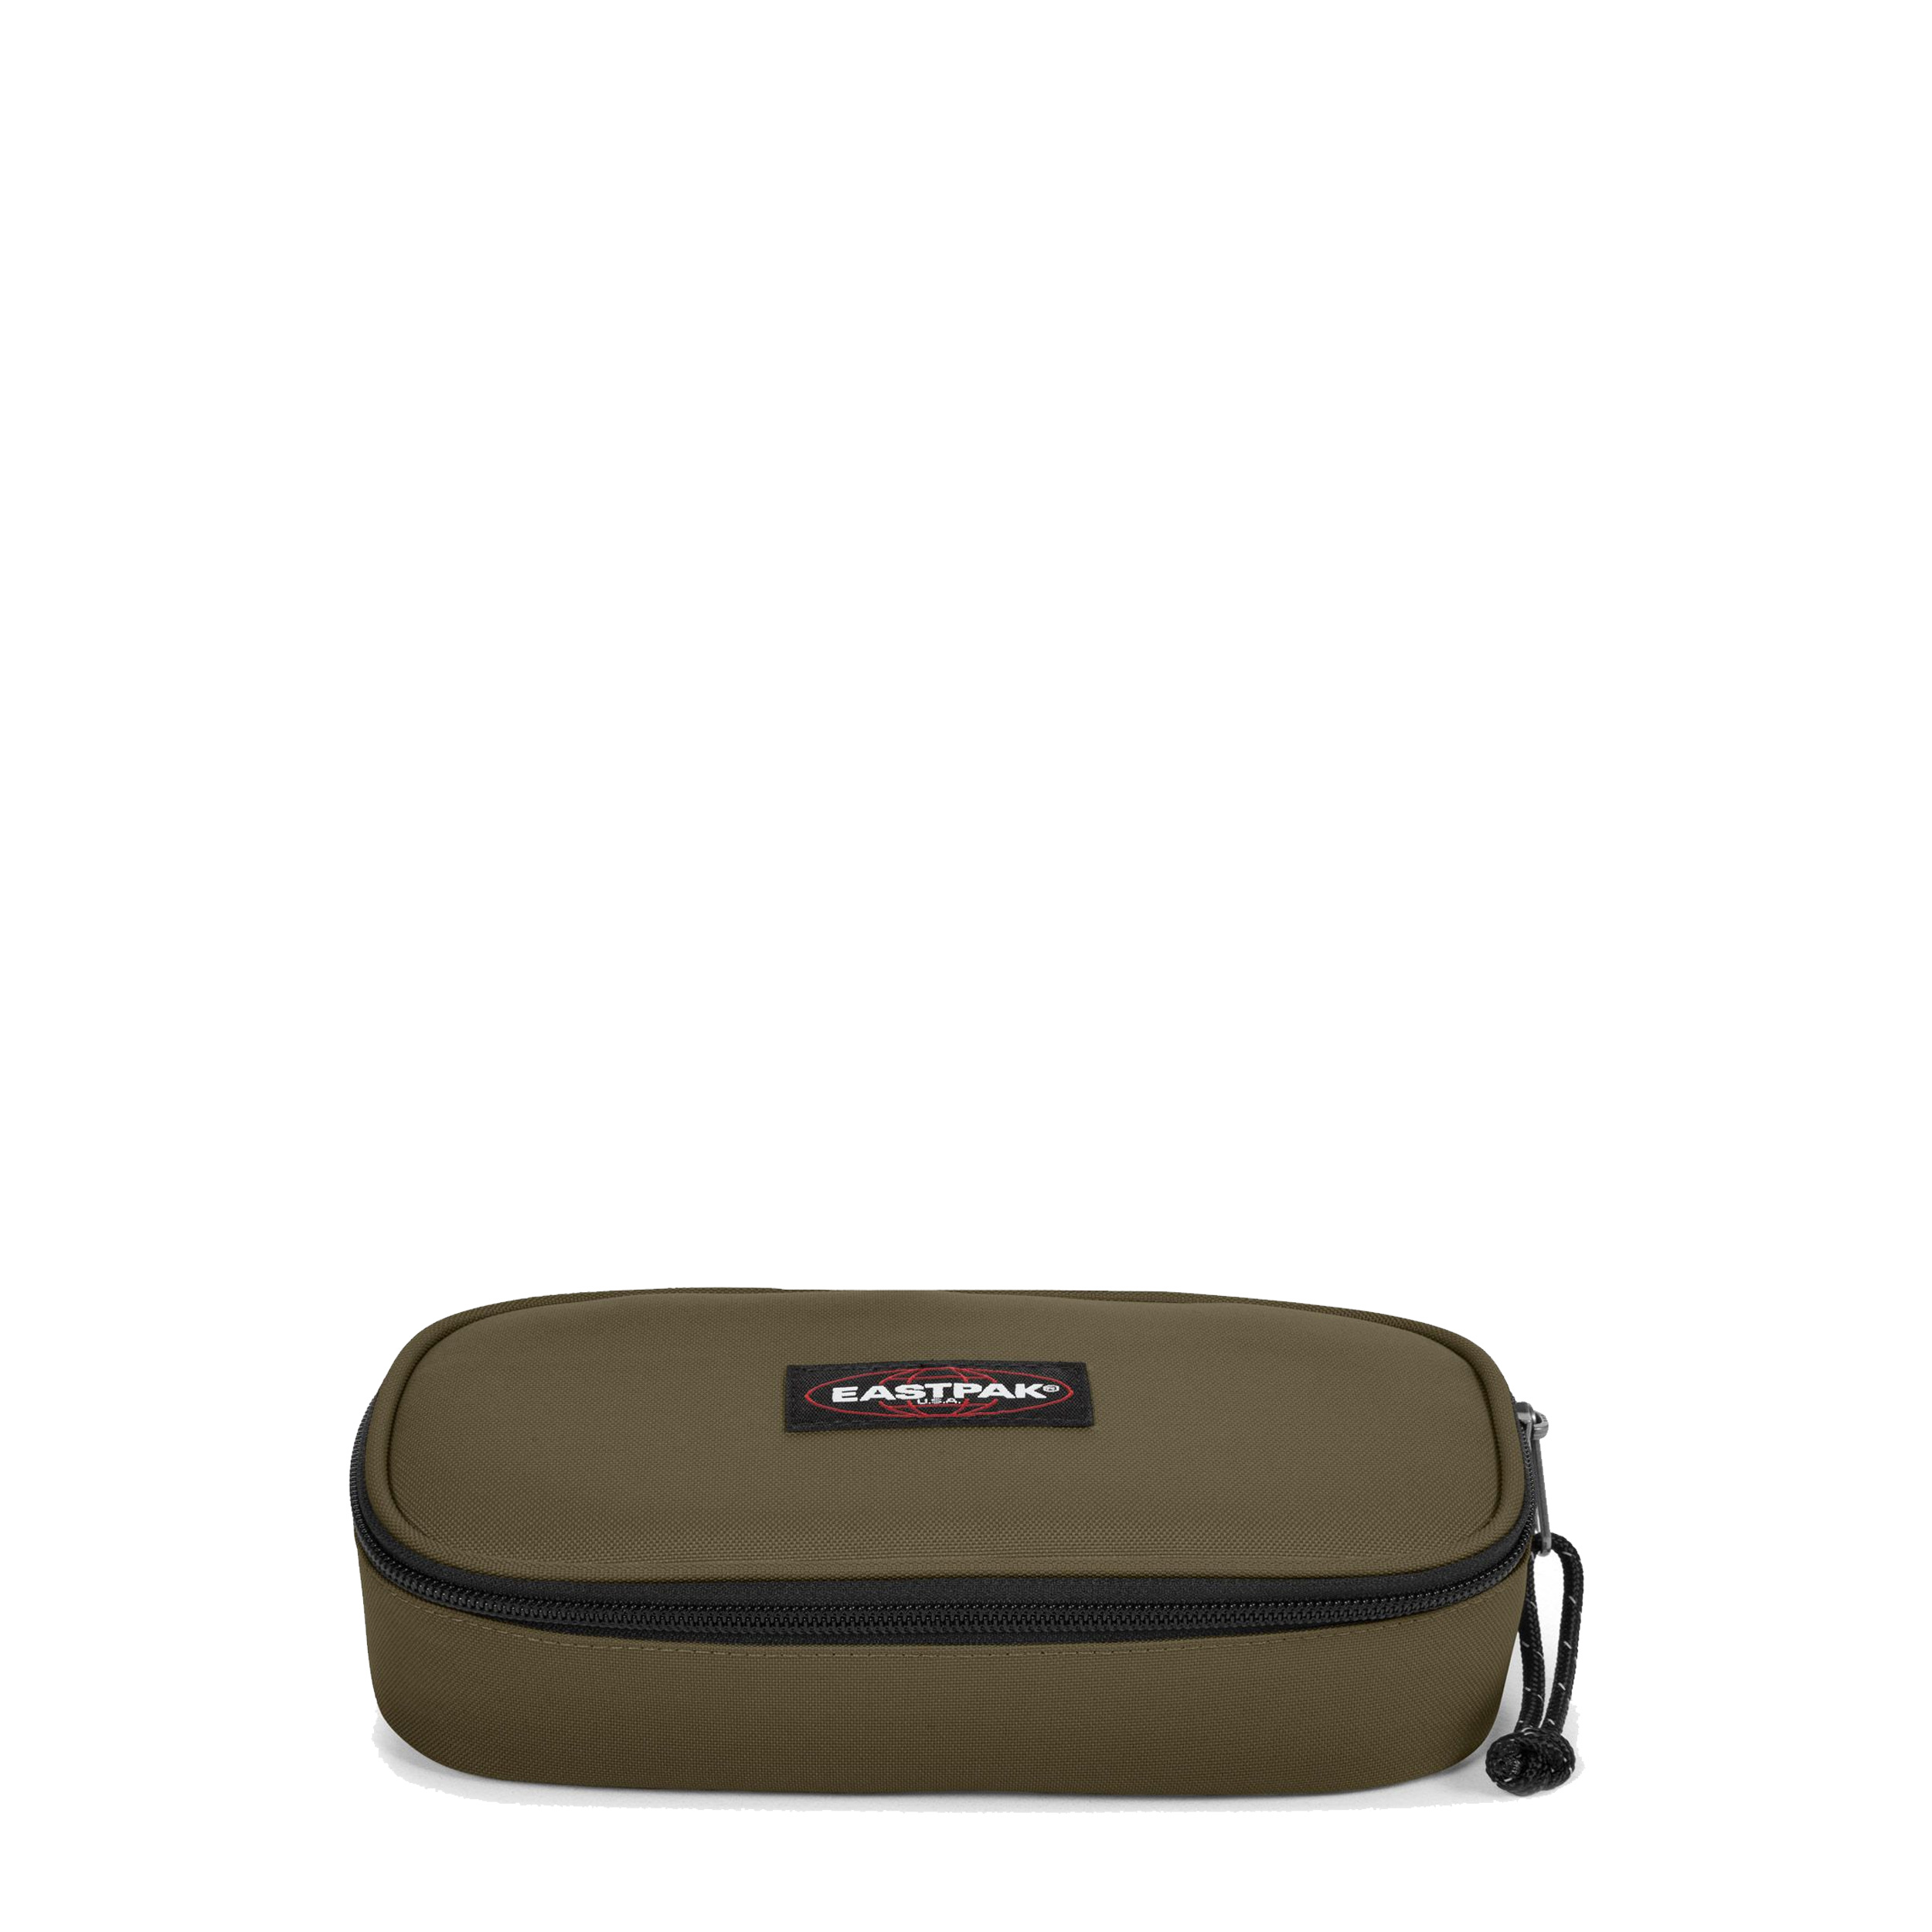 Trousse Oval Eastpak army olive avant